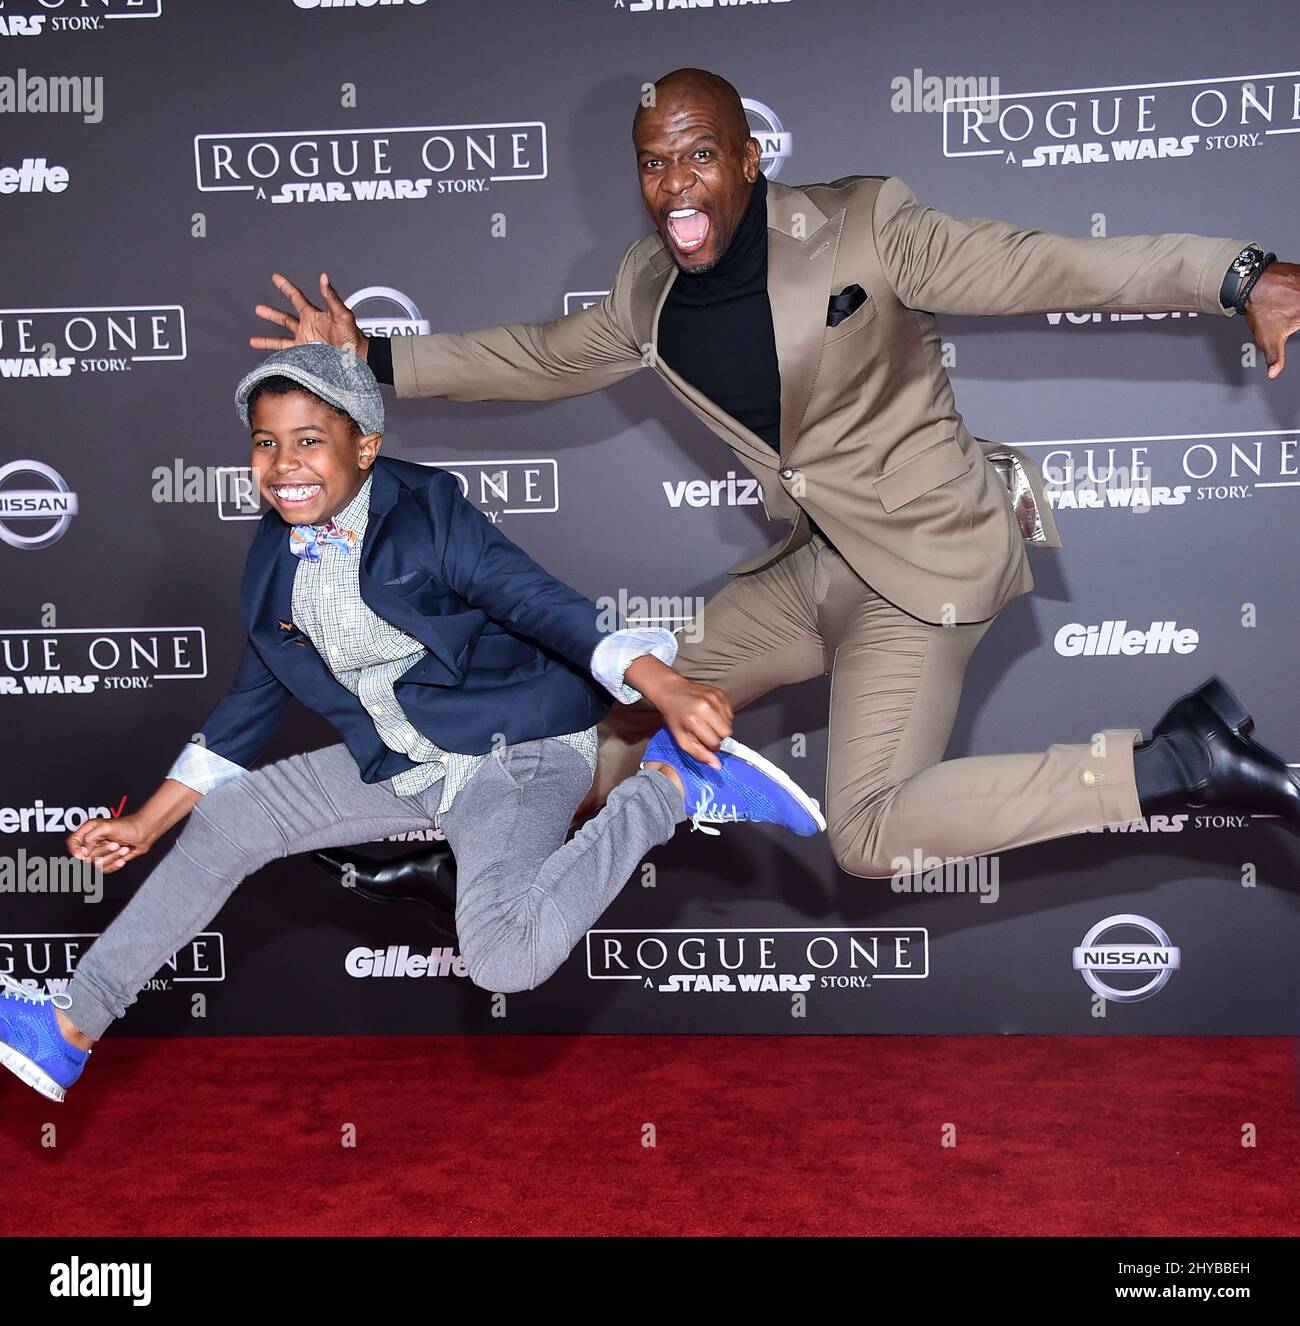 https://c8.alamy.com/comp/2HYBBEH/terry-crews-and-isaiah-crews-arriving-at-lucasfilms-rogue-one-a-star-wars-story-world-premiere-held-at-the-pantages-theatre-in-los-angeles-usa-2HYBBEH.jpg